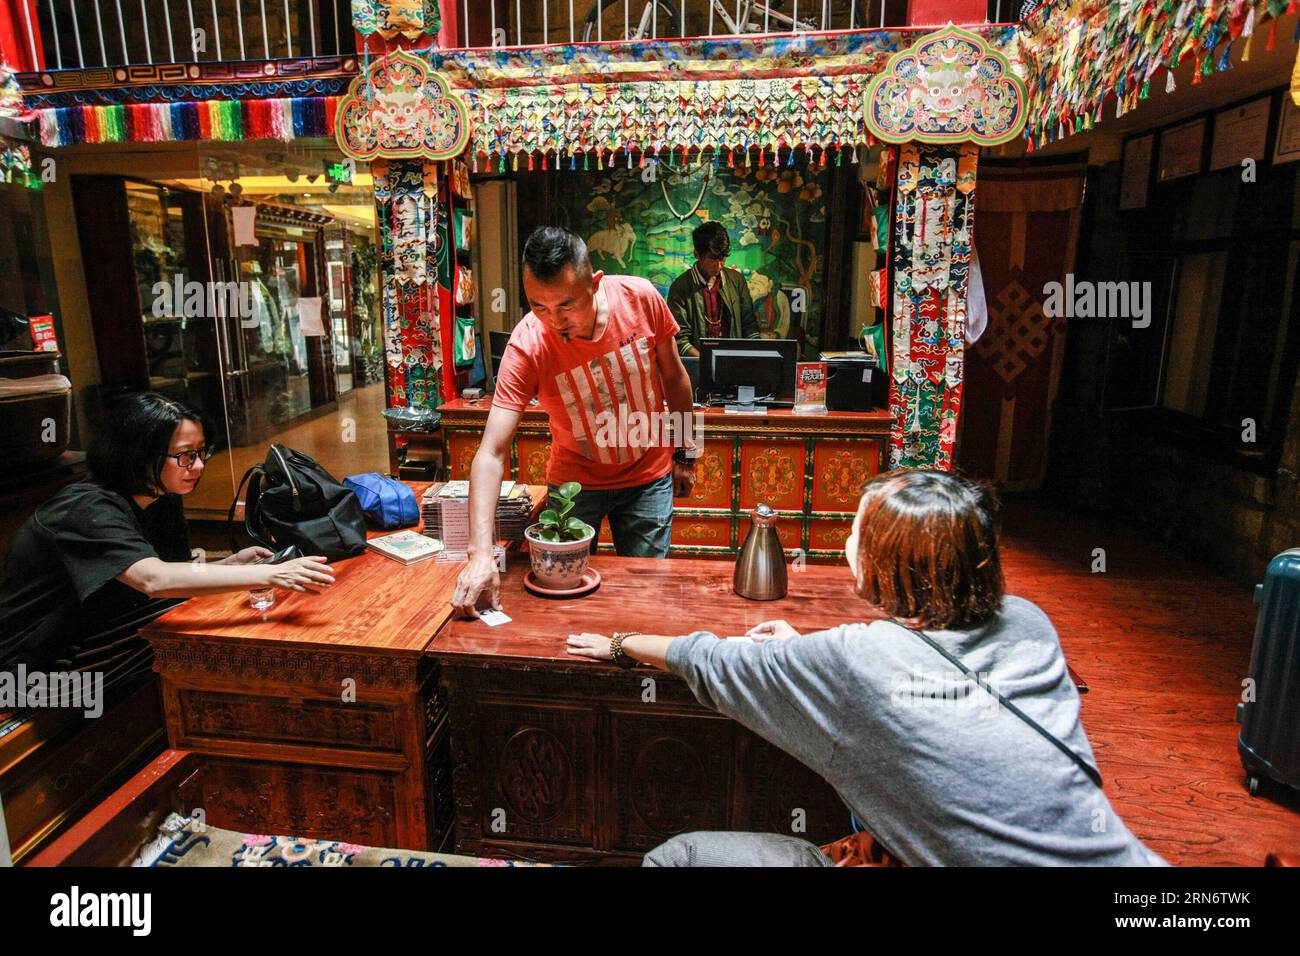 (150807) -- LHASA,  - Lobsang Tashi (C) helps guests check in at one of his traditional Tibetan style hotels in Lhasa, capital of southwest China s Tibet Autonomous Region, Aug. 5, 2015. Born in a mountain village in Shannan Prefecture of Tibet, Lobsang Tashi has long harbored a deep love of the traditional culture of Tibet. In his youth, Lobsang came to the old town of Lhasa and worked as a tour guide. Driven by keen interest in protecting old buildings and culture of Lhasa, Lobsang Tashi got a chance to win a business right to renovate several old buildings into modern decent hotels. In Lobs Stock Photo